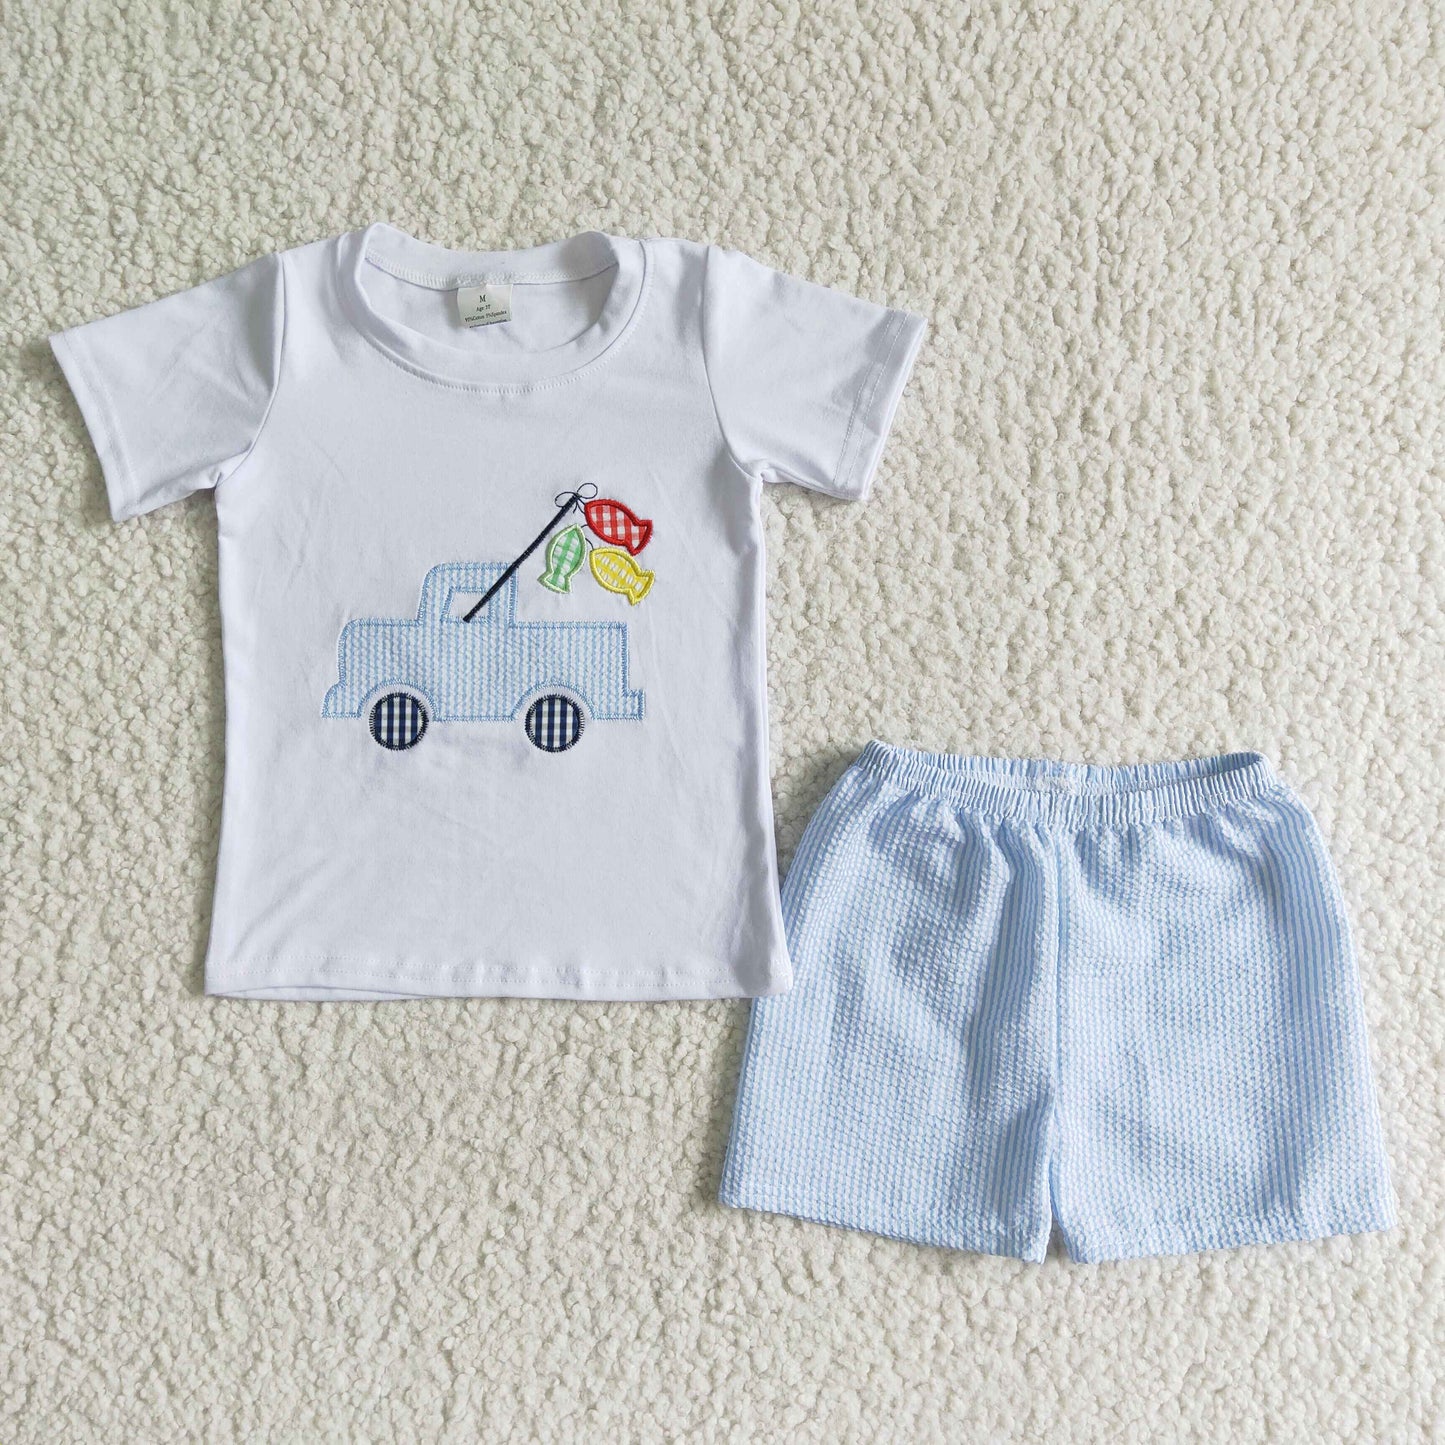 Fishing truck embroidery baby boy summer clothes